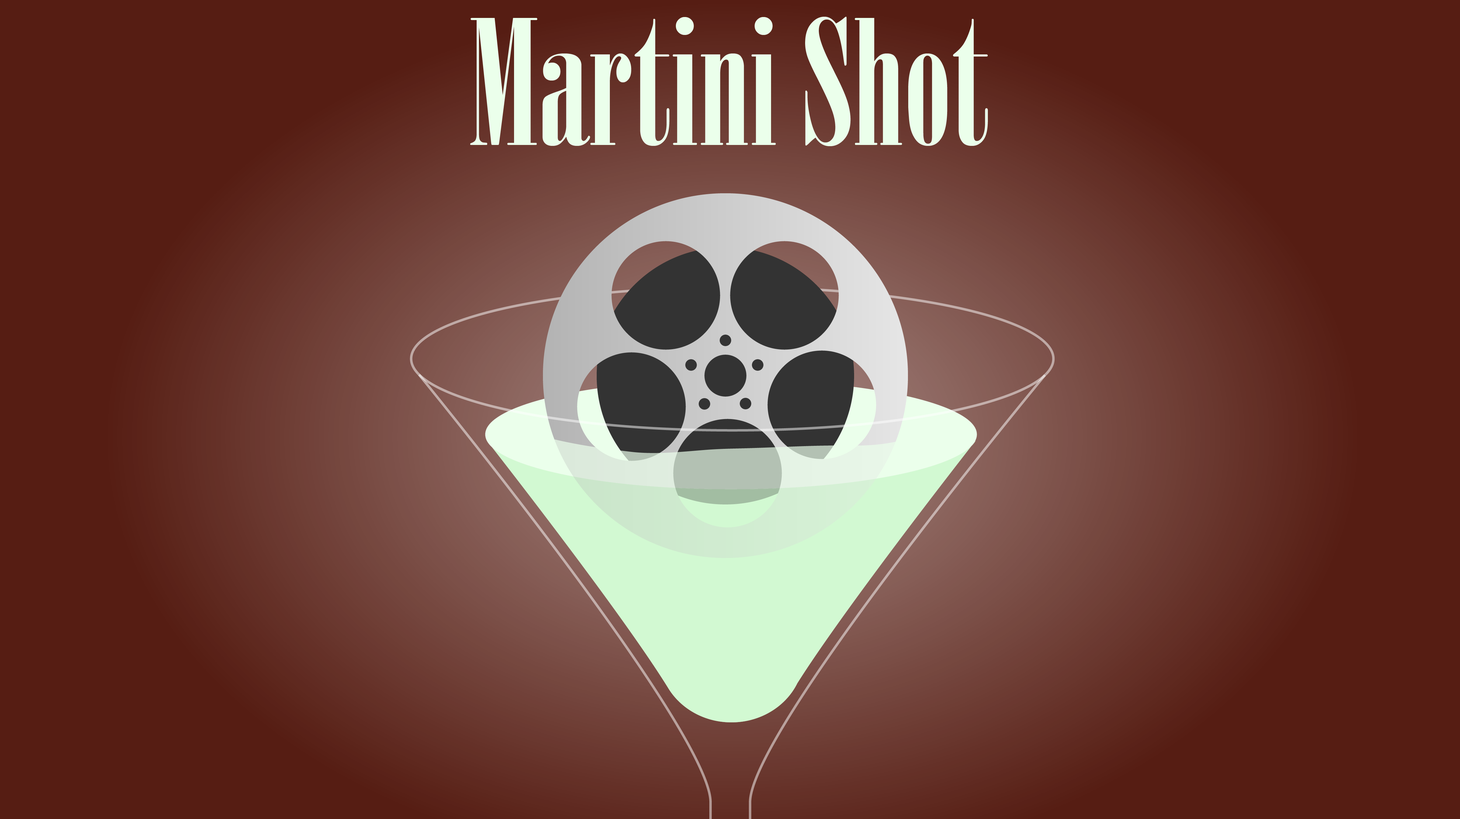 Today, for the first time ever, Rob attempts to monetize Martini Shot, and even monetize this promo, by reminding everyone that my two books have been republished in one volume and are available on Amazon and fine bookstores everywhere.